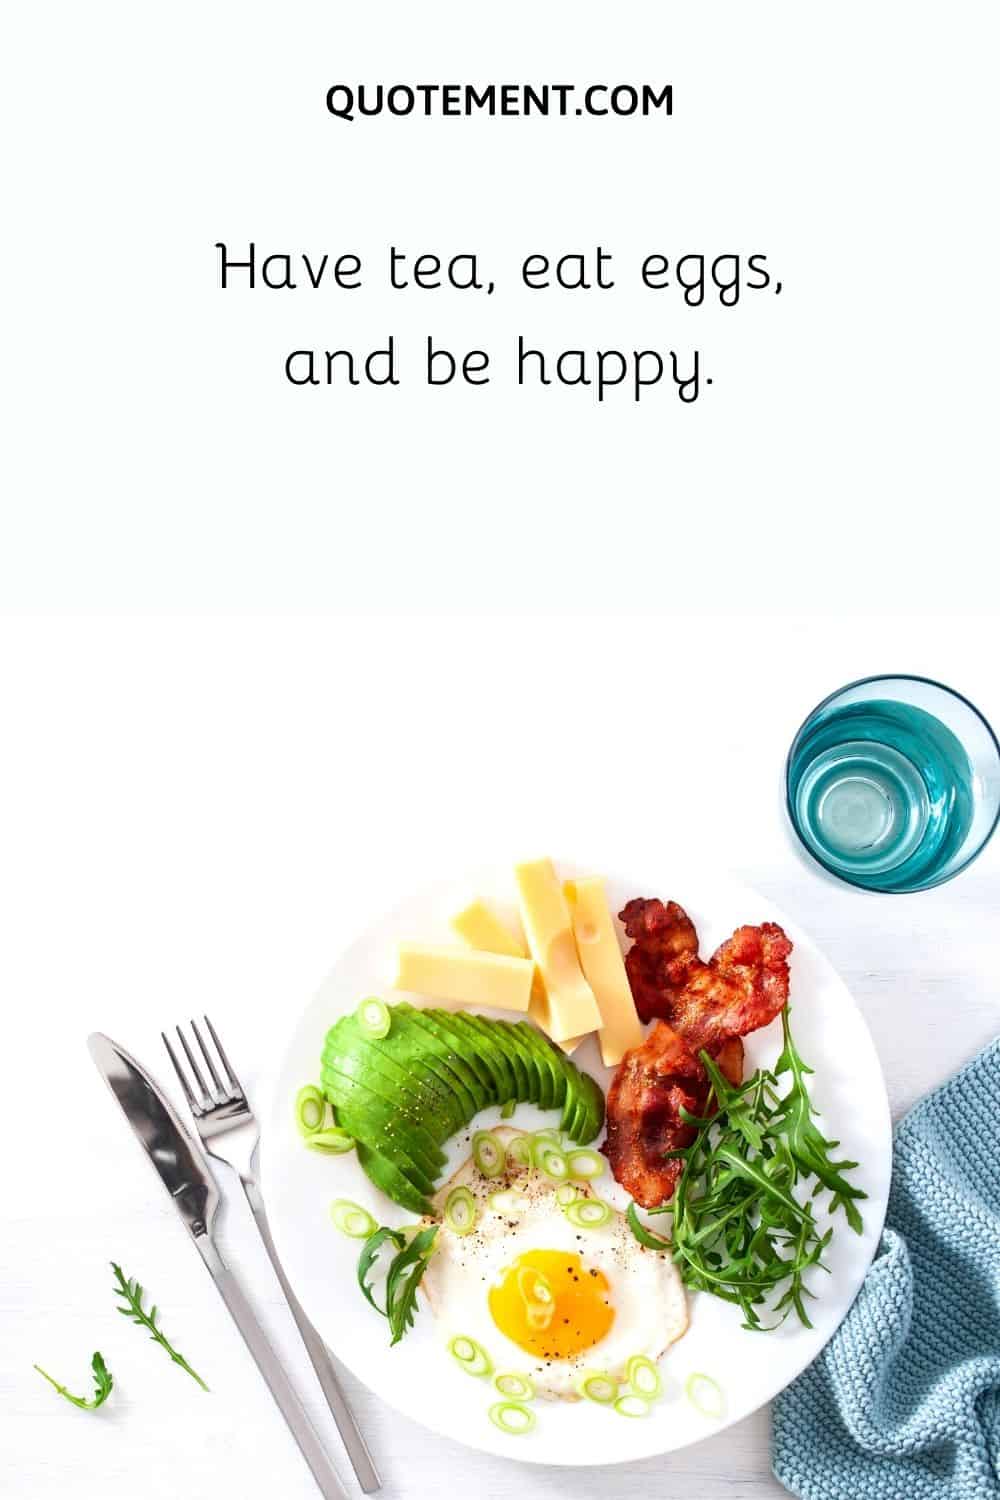 Have tea, eat eggs, and be happy.